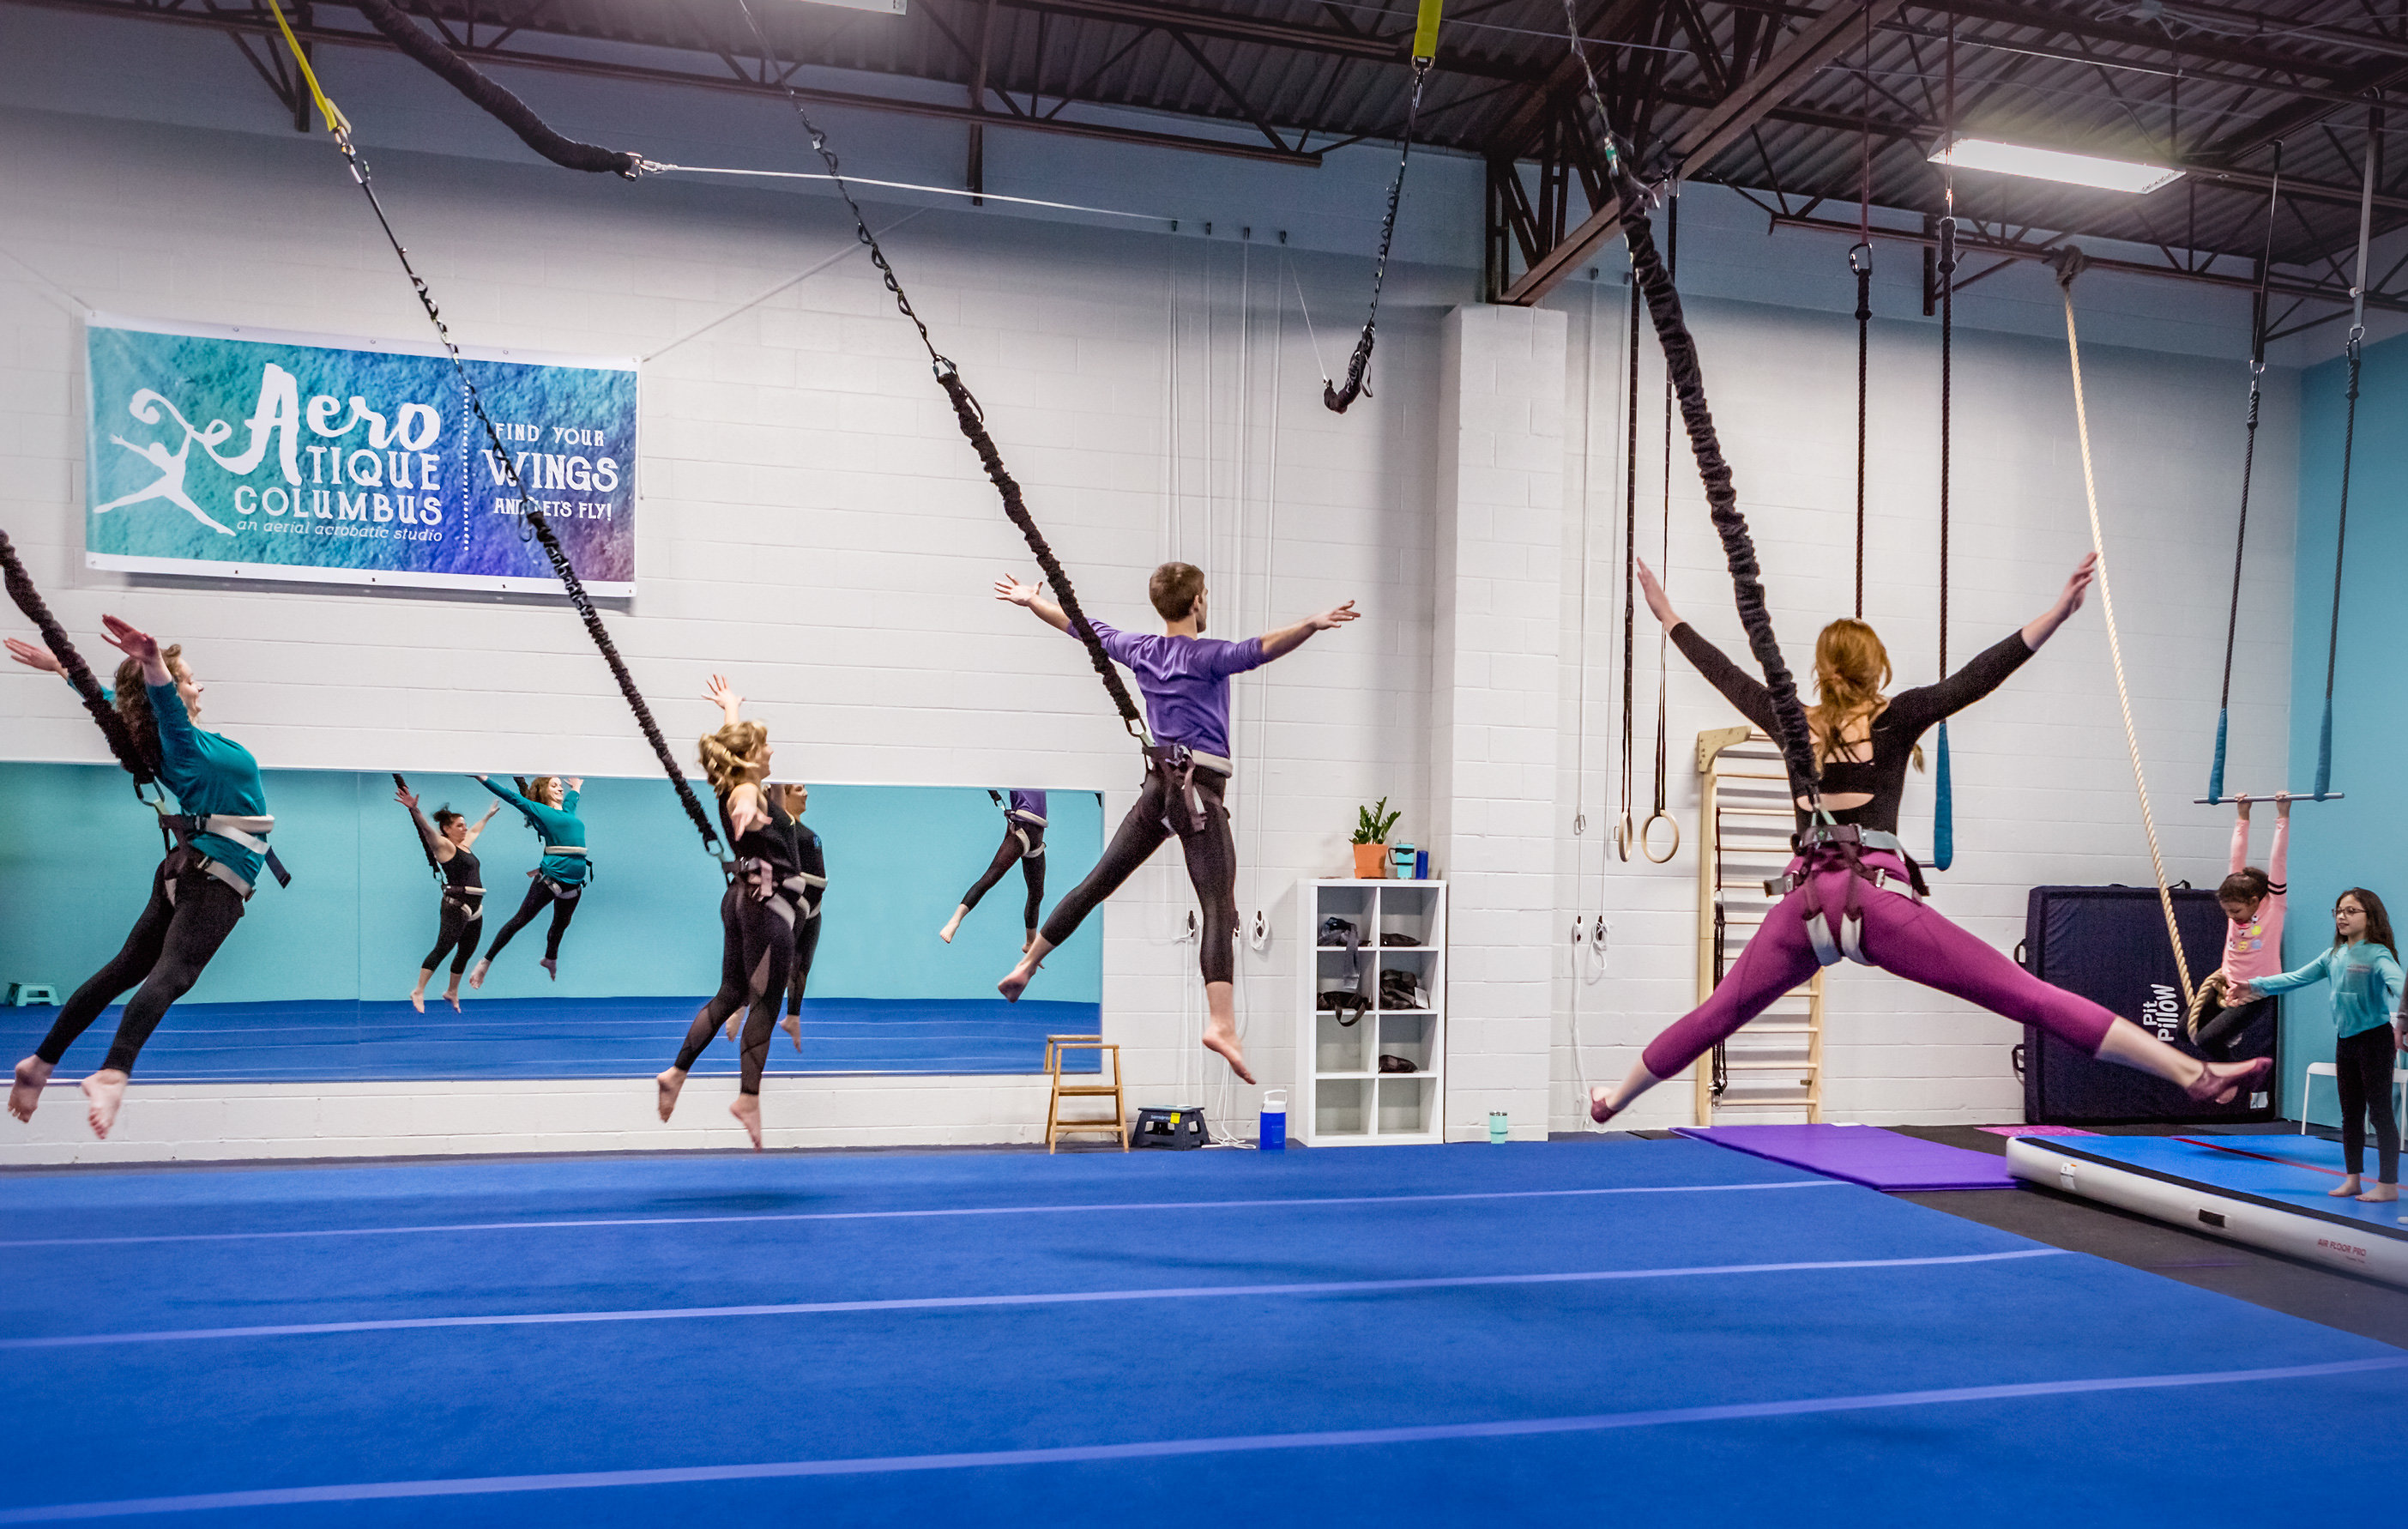 Flight to Fitness: Bungee cords take the pressure at So Fly fitness studio